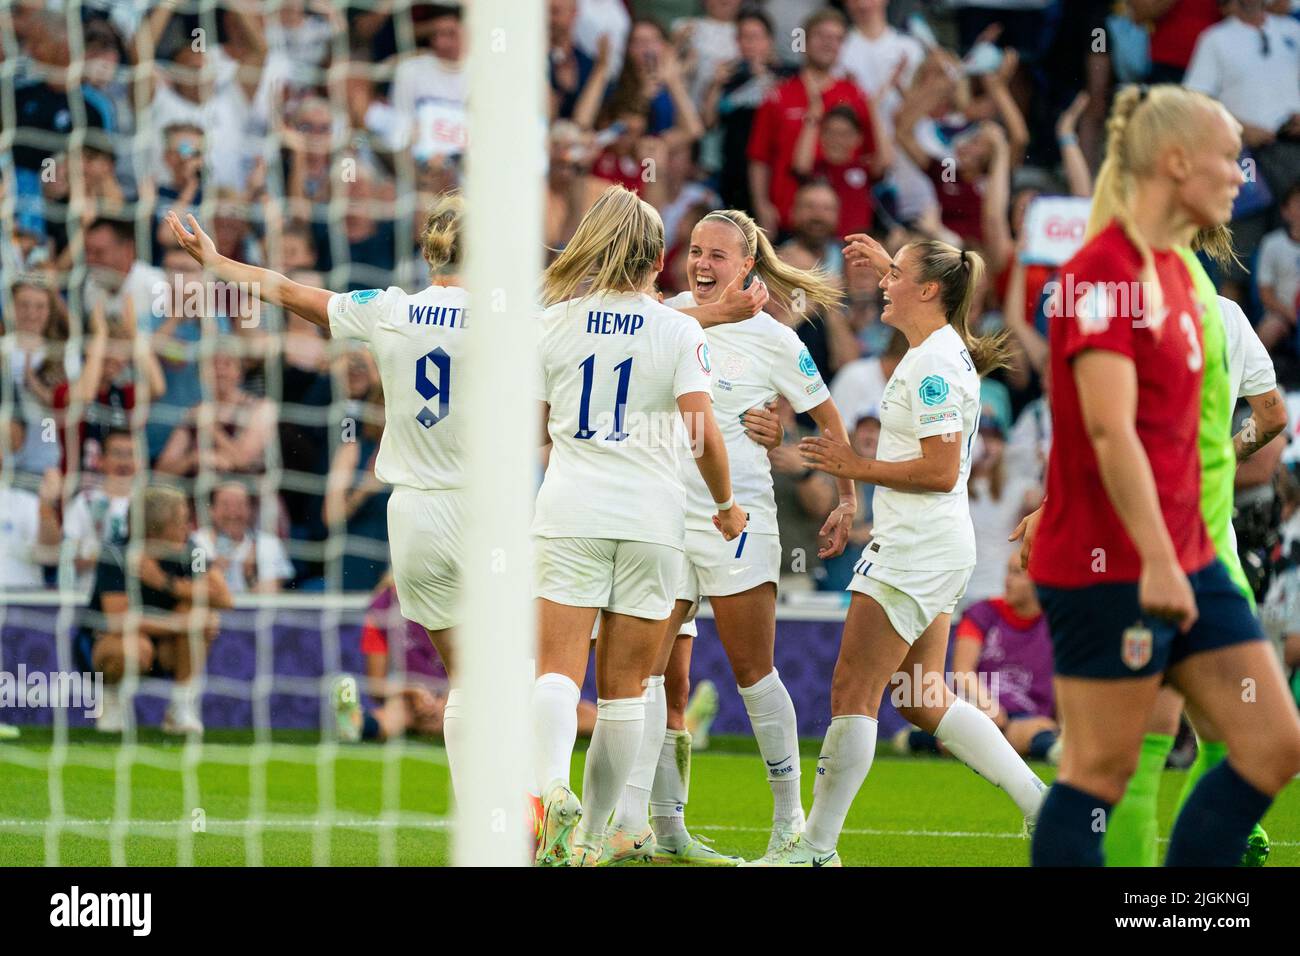 Brighton, UK. 11th July, 2022. England celebrate scoring their sixth goal in the first half (6-0) during the UEFA Womens Euro 2022 football match between England and Norway at the Community Stadium in Brighton, England. (Foto: Sam Mallia/Sports Press Photo/C - ONE HOUR DEADLINE - ONLY ACTIVATE FTP IF IMAGES LESS THAN ONE HOUR OLD - Alamy) Credit: SPP Sport Press Photo. /Alamy Live News Stock Photo